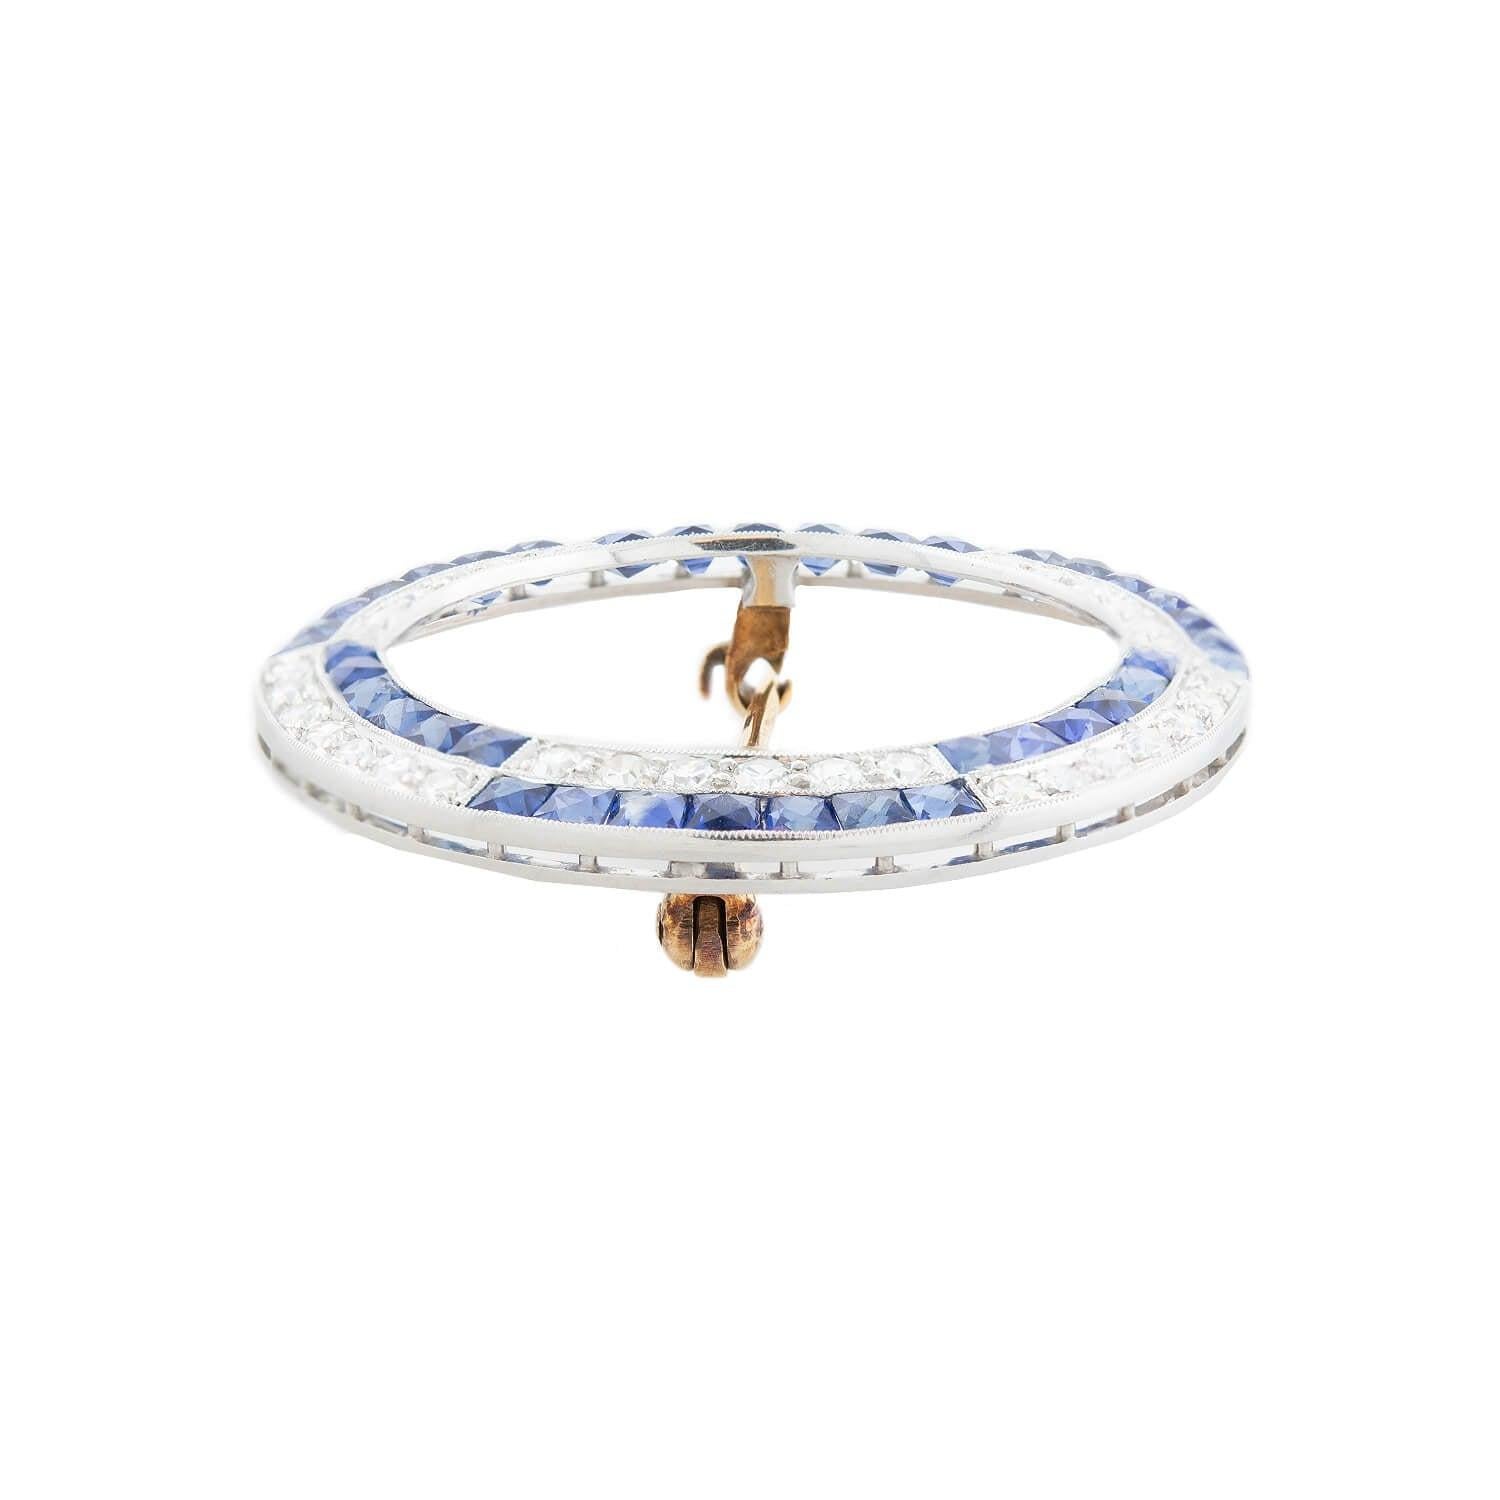 A timeless diamond and sapphire pin by famed maker Tiffany & Co.! Crafted in platinum, this gorgeous pin features 2ctw of glittering Single Cut diamonds and 1ctw of gorgeous French Cut sapphires. The diamonds and sapphires create an alternating